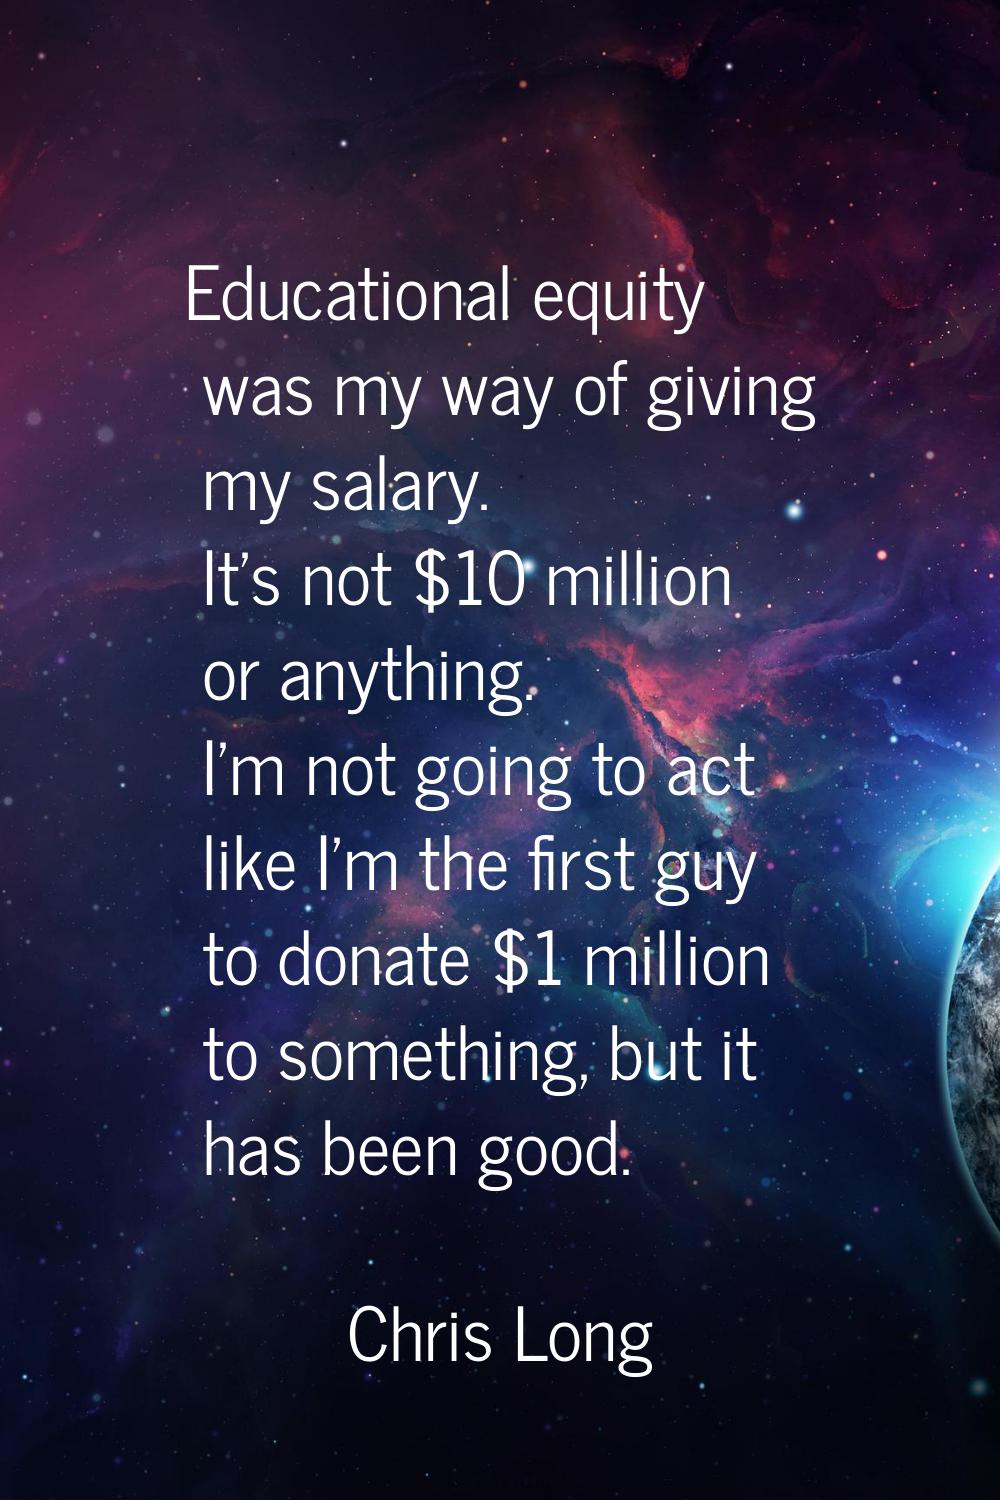 Educational equity was my way of giving my salary. It's not $10 million or anything. I'm not going 